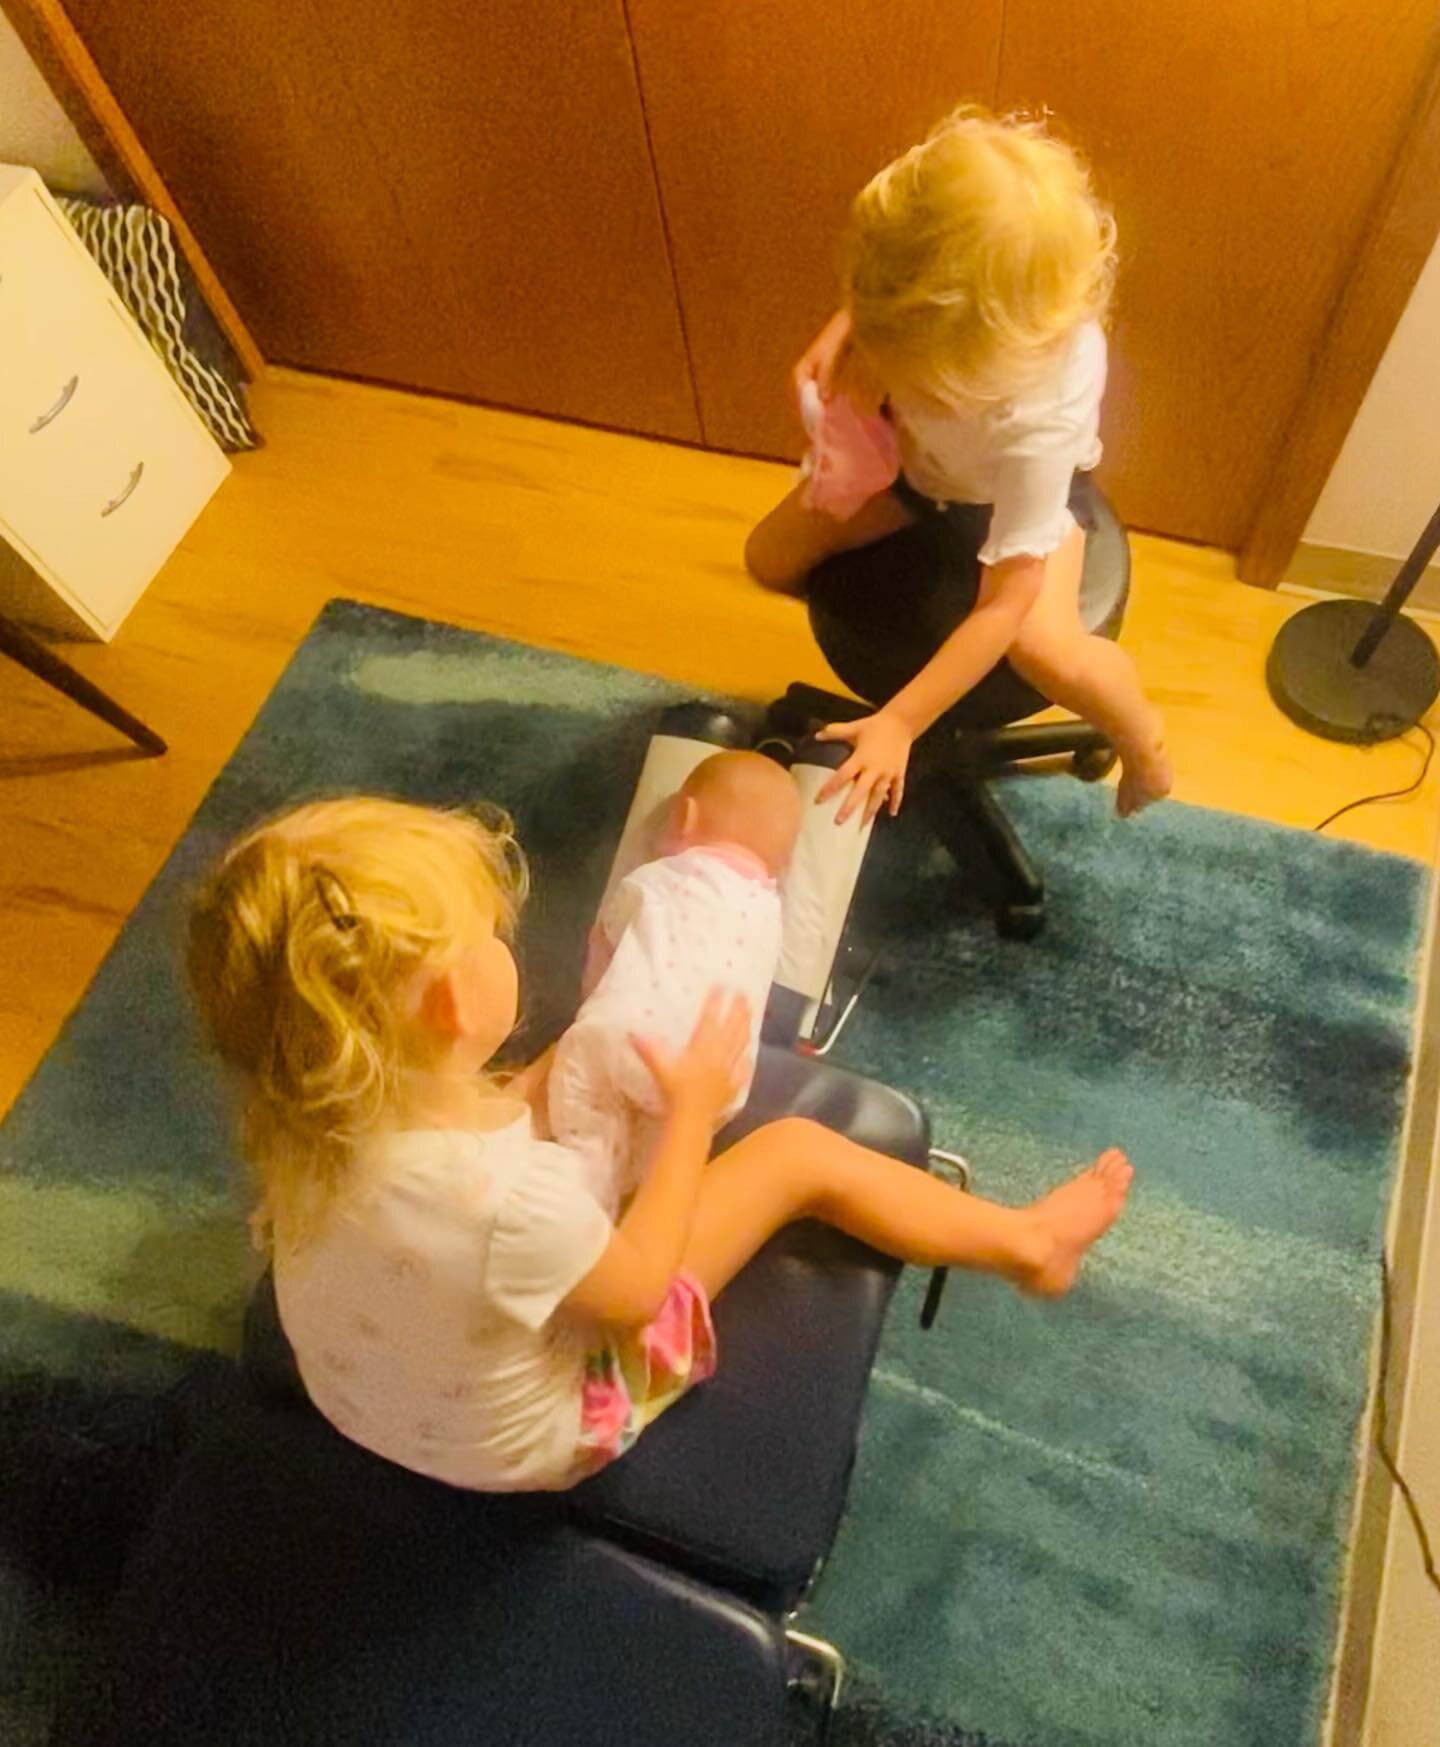 If you have a little one at home you know it is &ldquo;monkey see 🐵, monkey do 🙉 ,&rdquo; this definitely applies when coming to the chiropractor too! 😉

Starting your whole family under chiropractic care is a great way to set an awesome example o